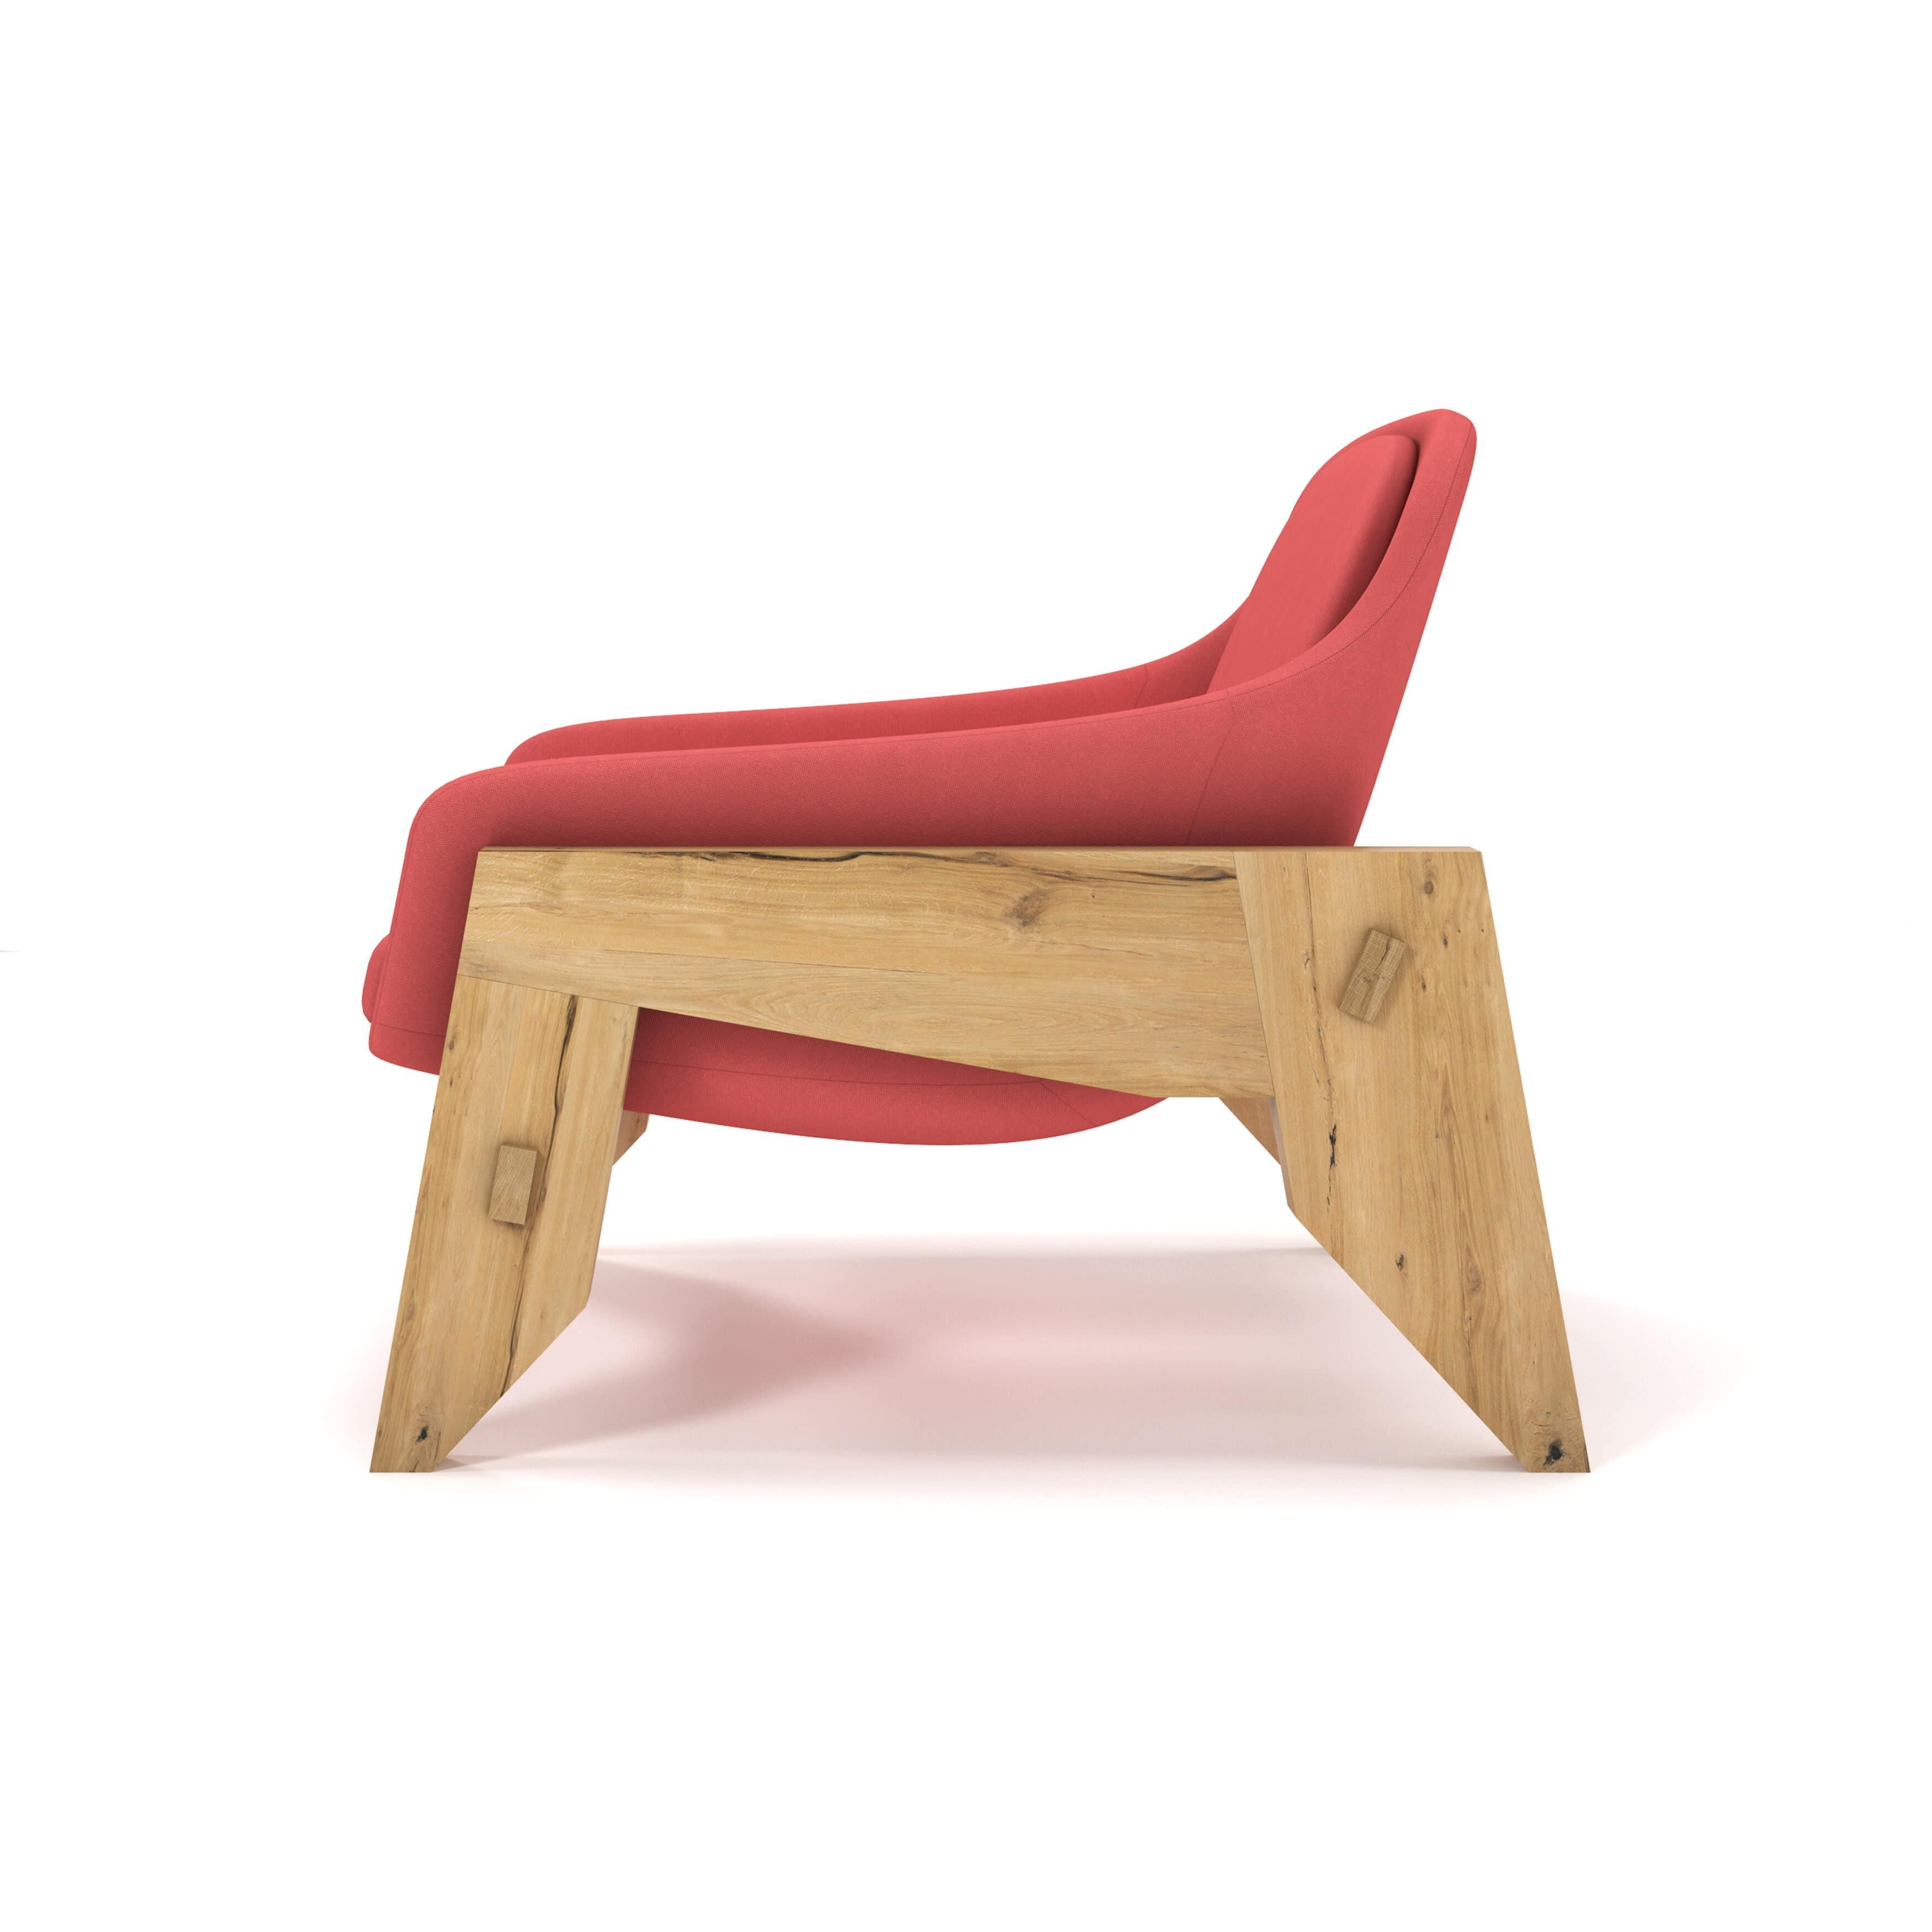 Introducing the Nava-Arm Chair, with its vibrant summer color and comfortable design. Constructed with wood joinery, this piece will provide reliable and lasting comfort. Enjoy quality and style with the Nava-Arm Chair.

All Tektōn pieces are made